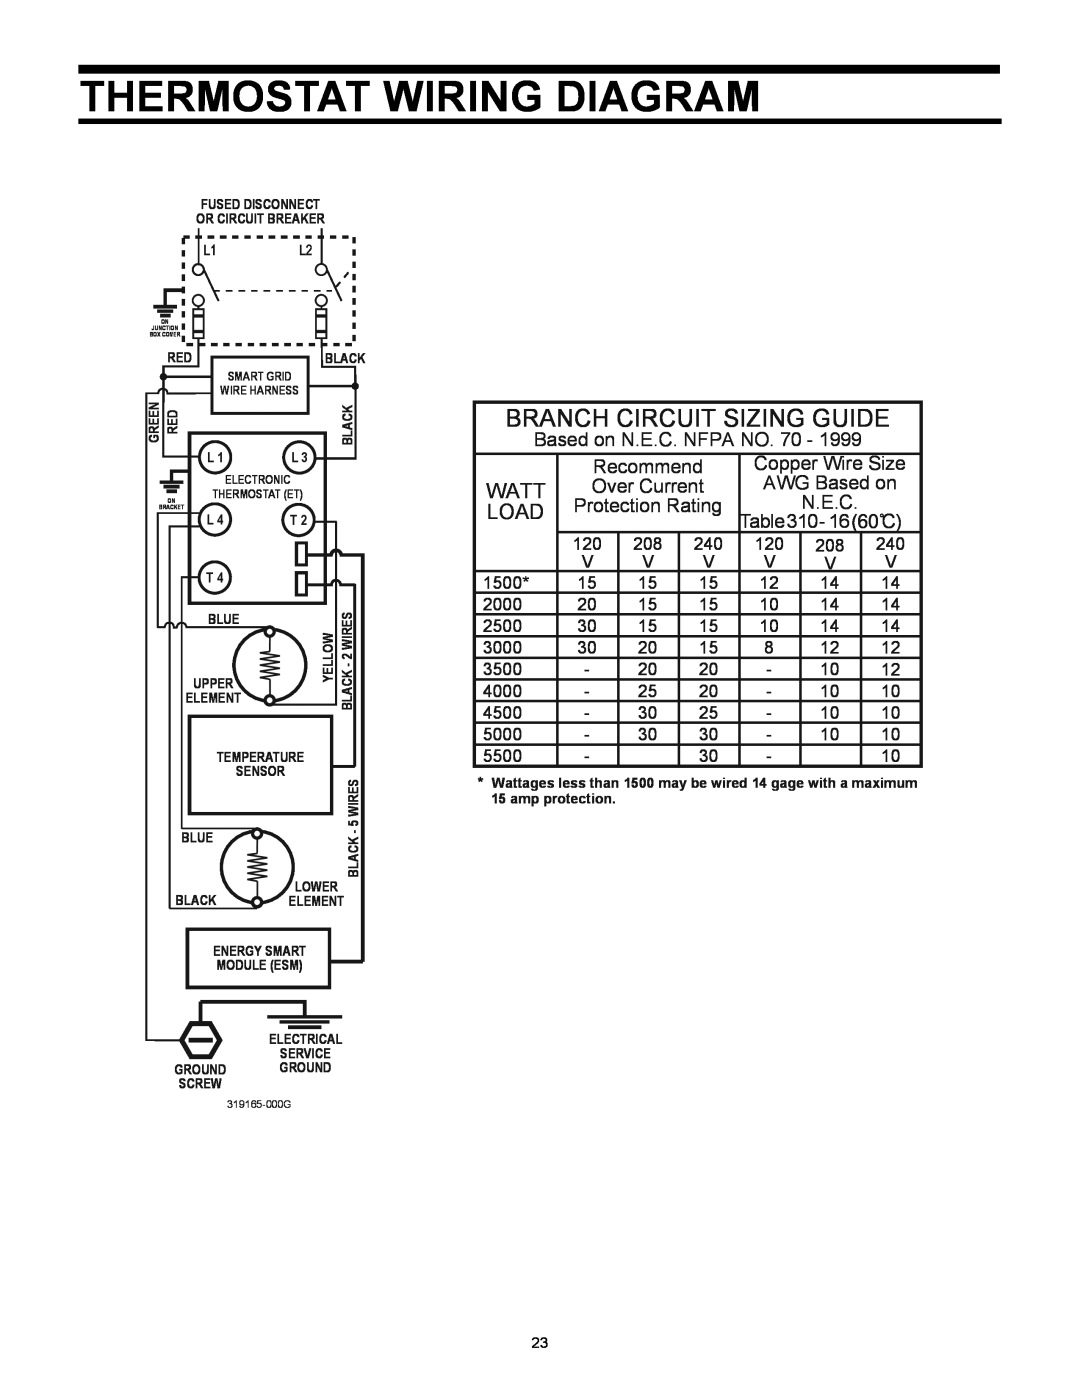 Whirlpool 318686-000 Thermostat Wiring Diagram, Branch Circuit Sizing Guide, Watt, Load, Based on N.E.C. NFPA NO. 70 